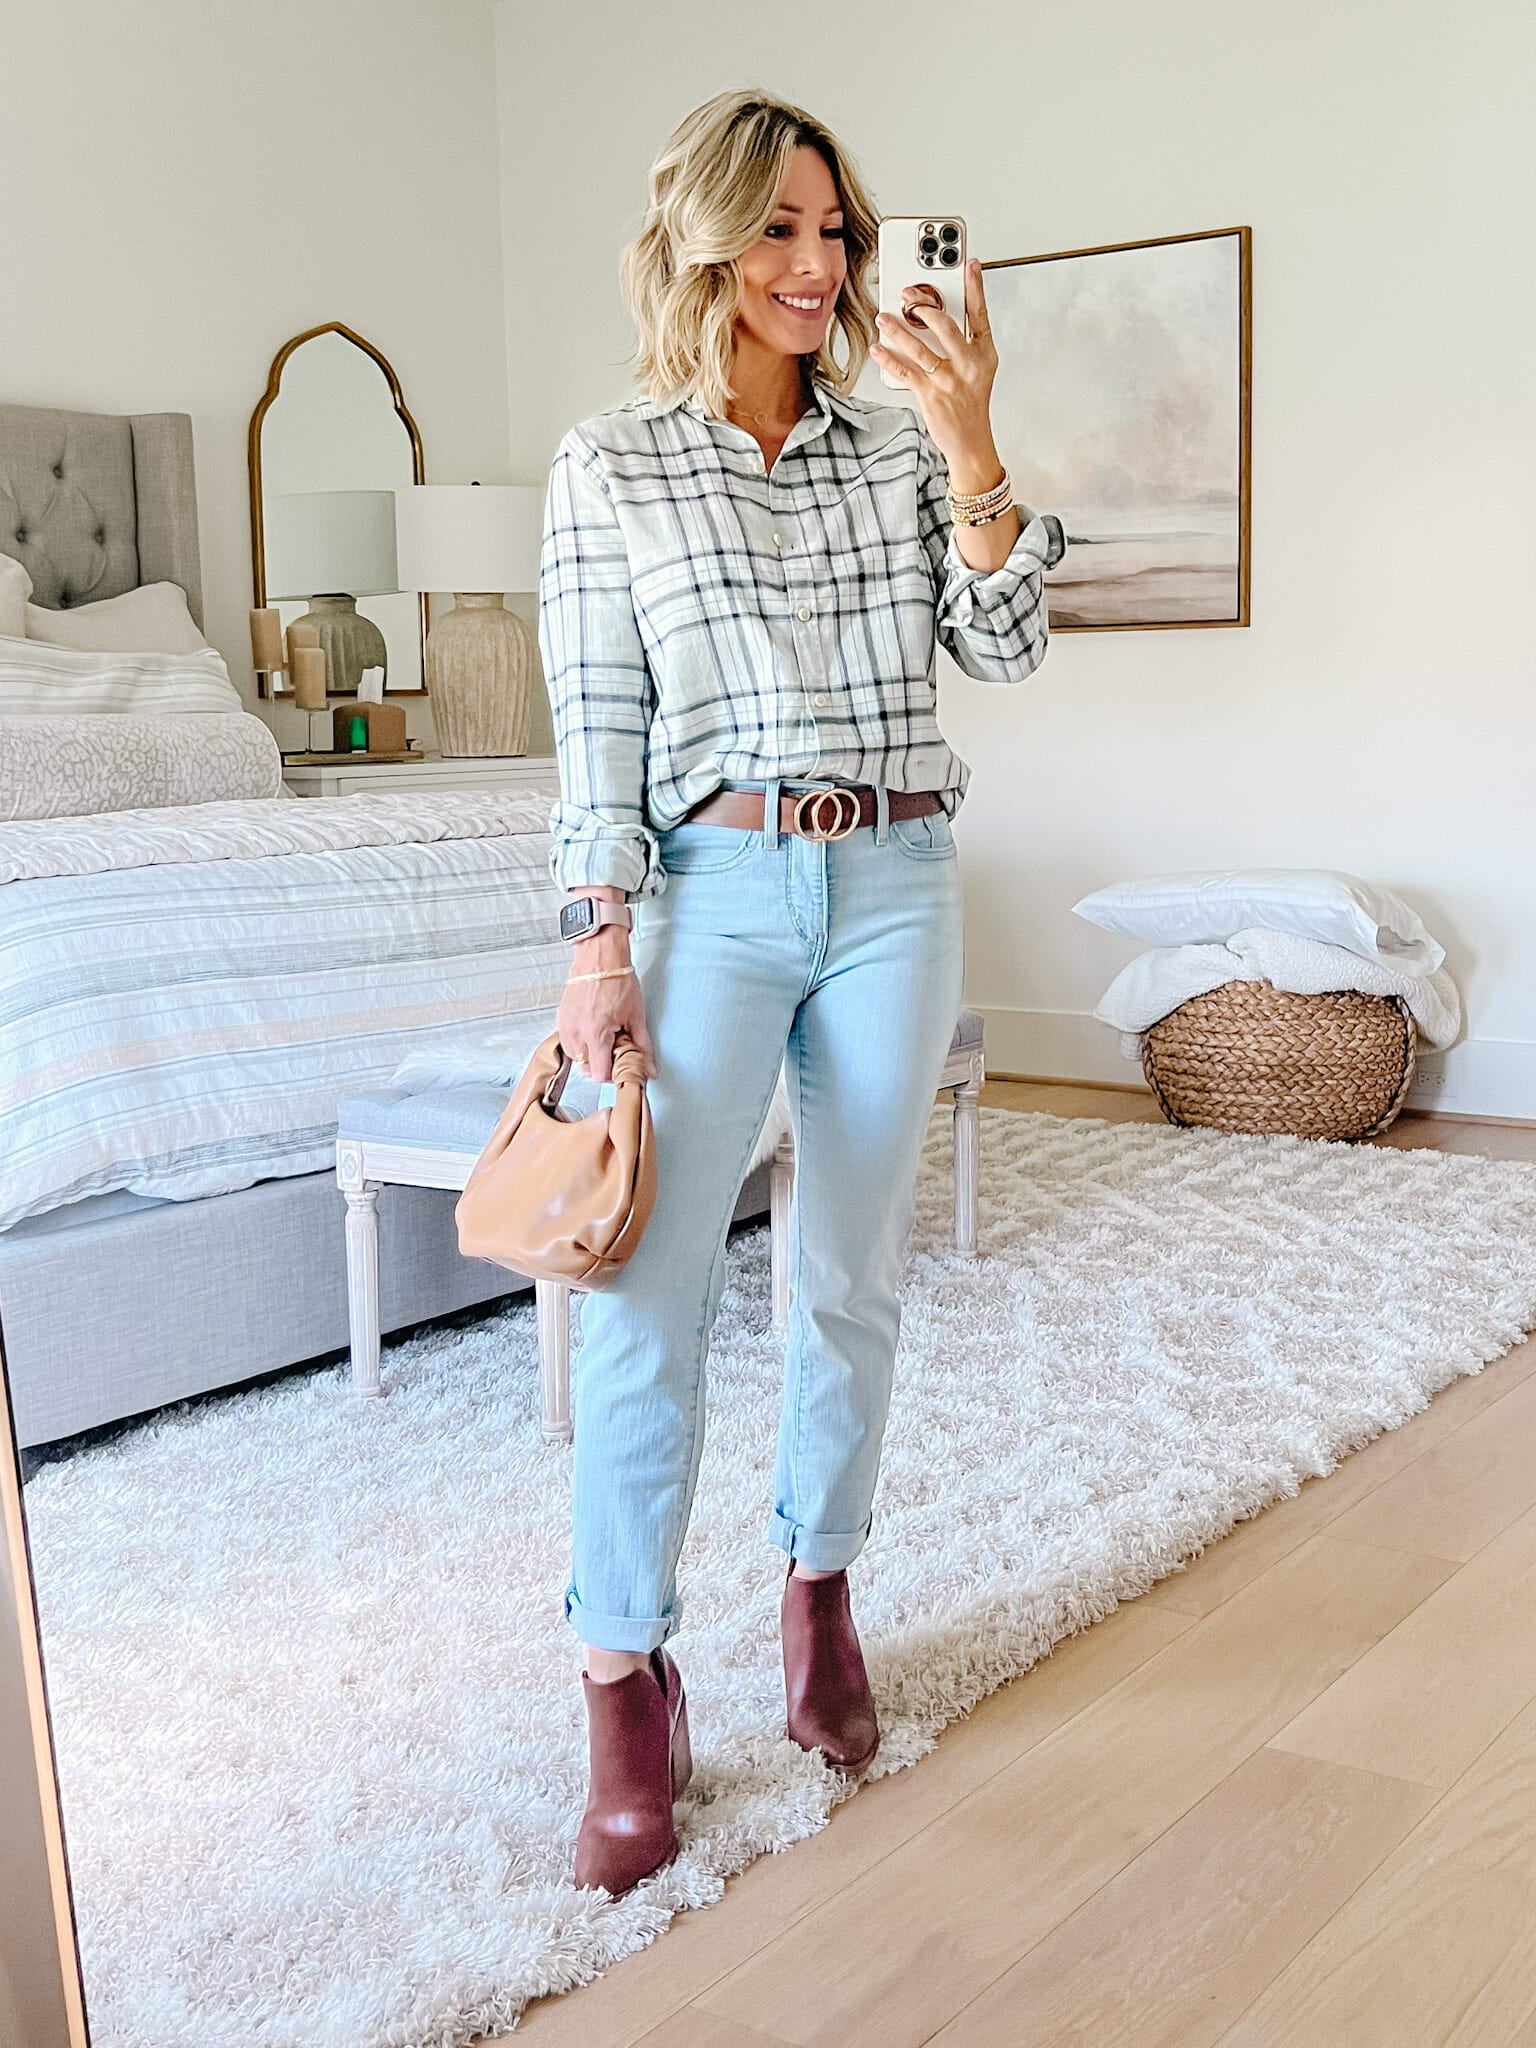 Gray Flannel, Jeans, Booties, Bag